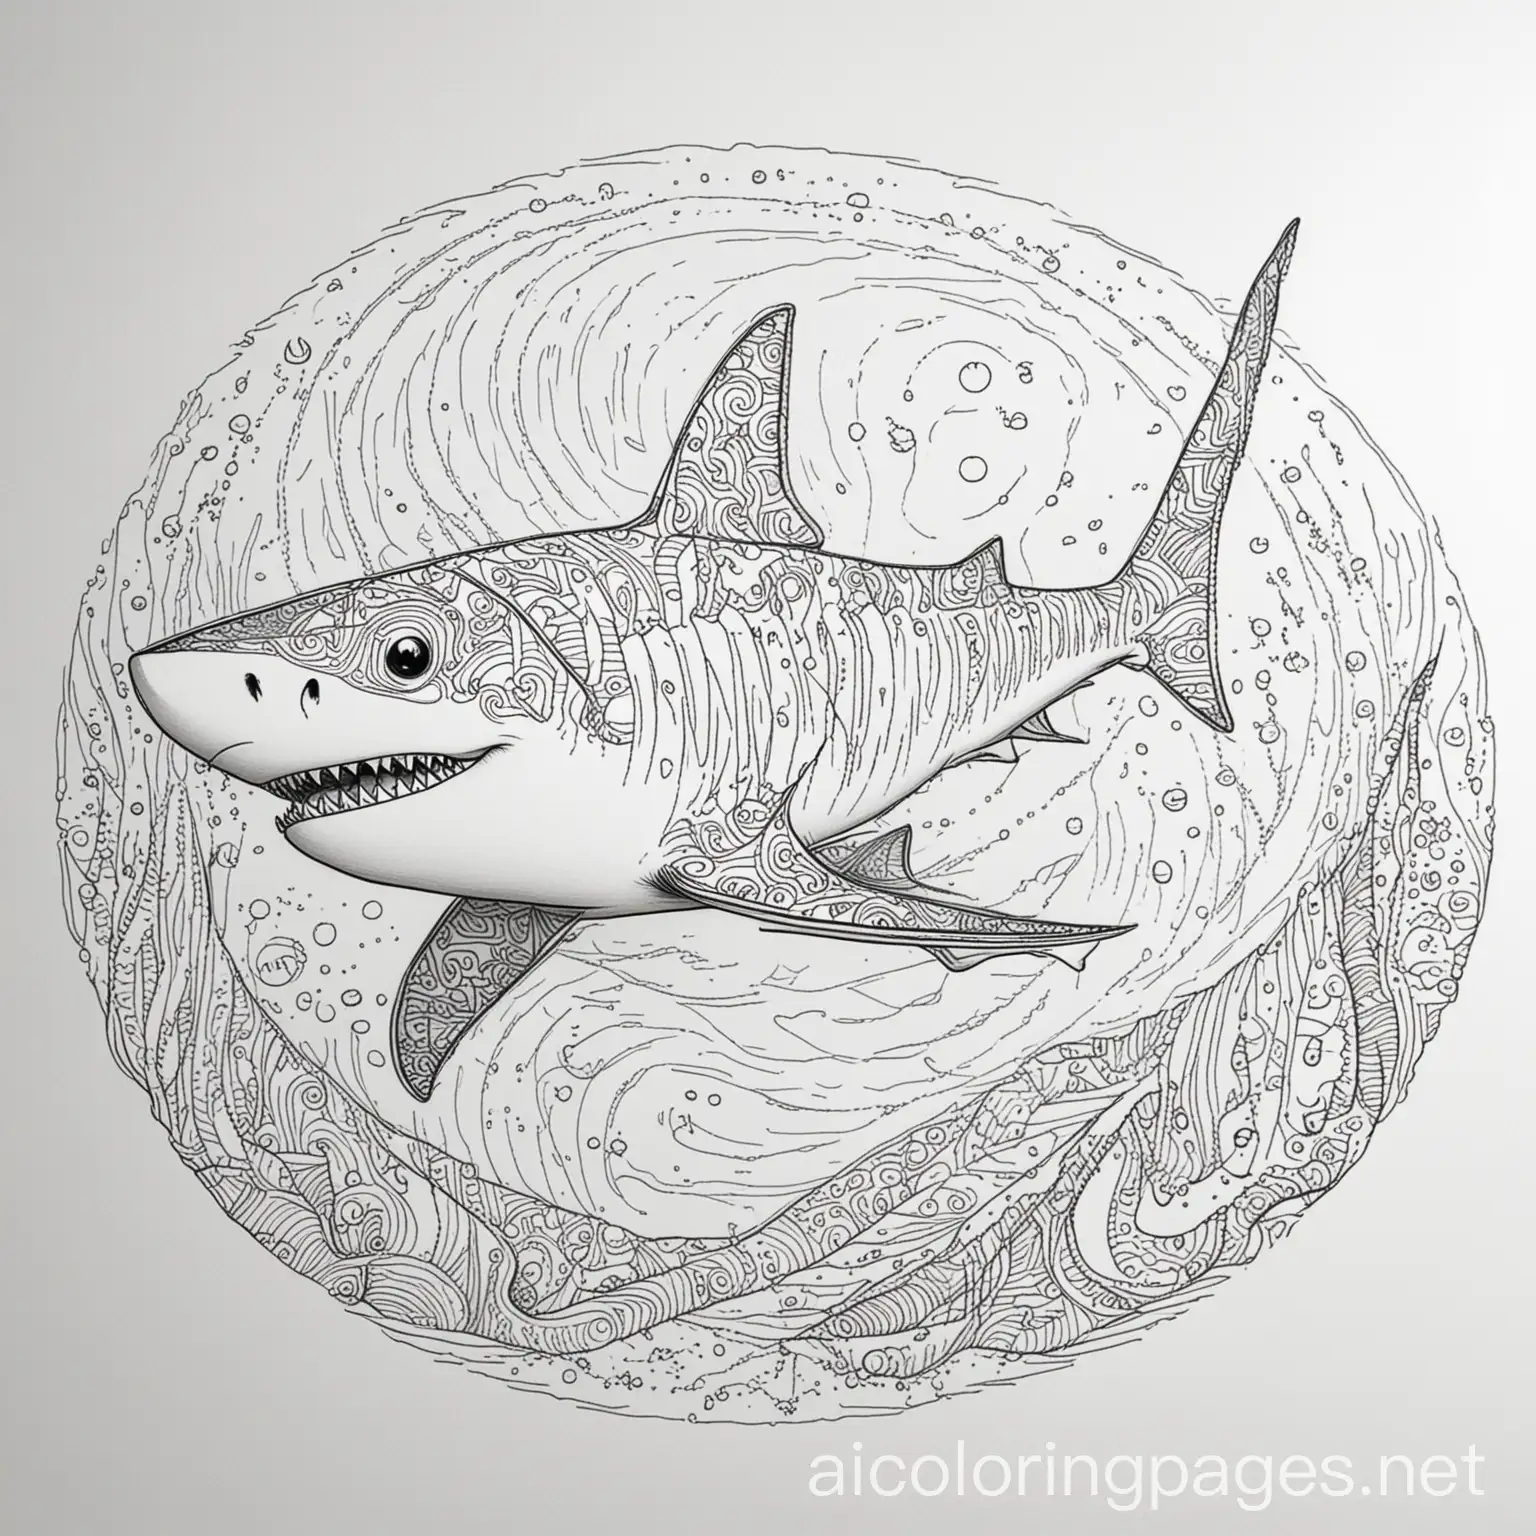 A Shark with vivid pattern inside of it, coloring book photo, thick lines,, Coloring Page, black and white, line art, white background, Simplicity, Ample White Space. The background of the coloring page is plain white to make it easy for young children to color within the lines. The outlines of all the subjects are easy to distinguish, making it simple for kids to color without too much difficulty